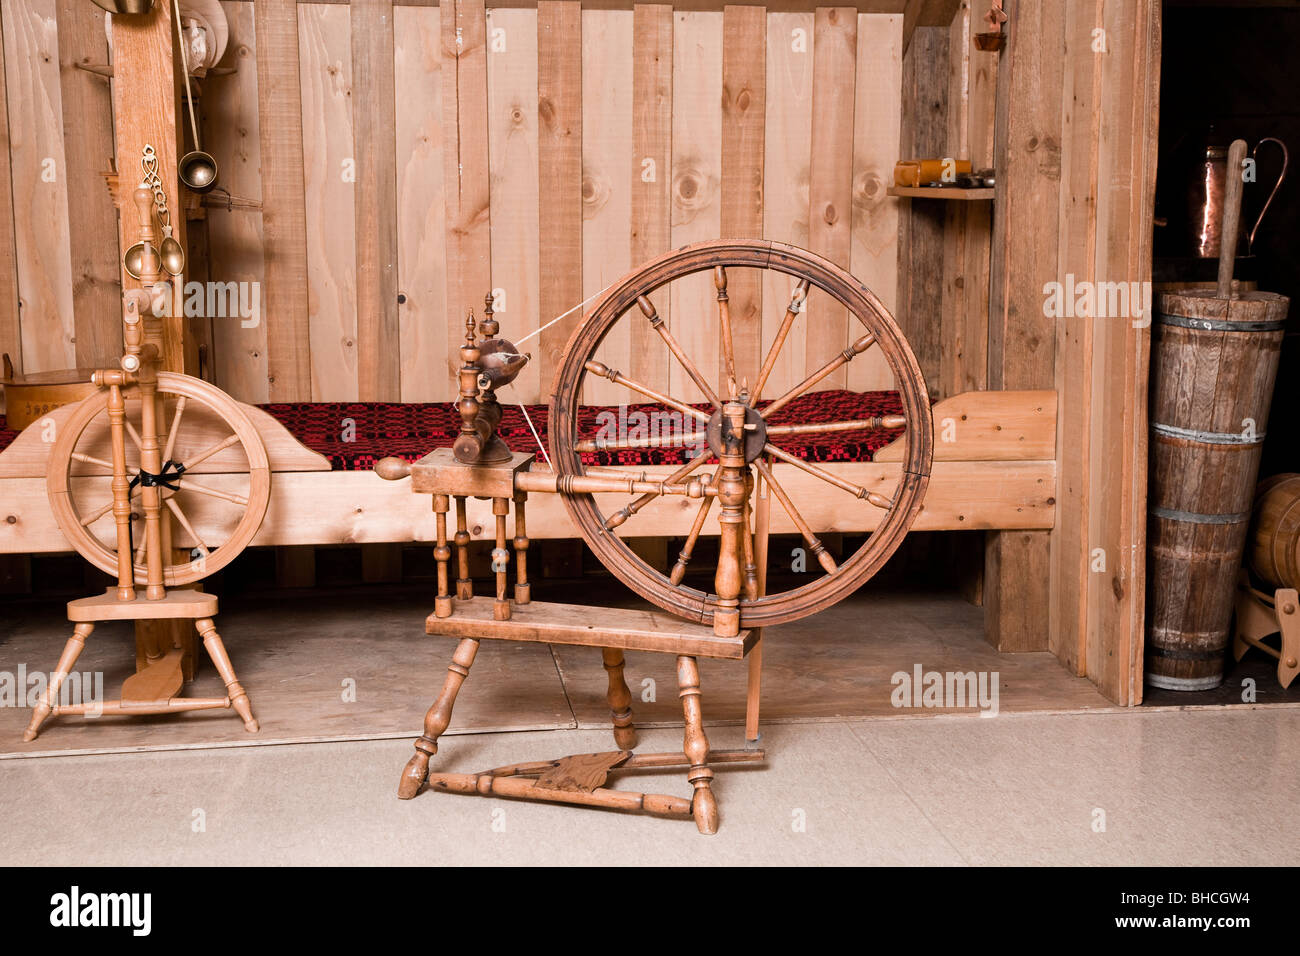 Old spinning wheels, a butter churn and a bed inside a typical living room in old Icelandic farmhouses. Iceland Stock Photo